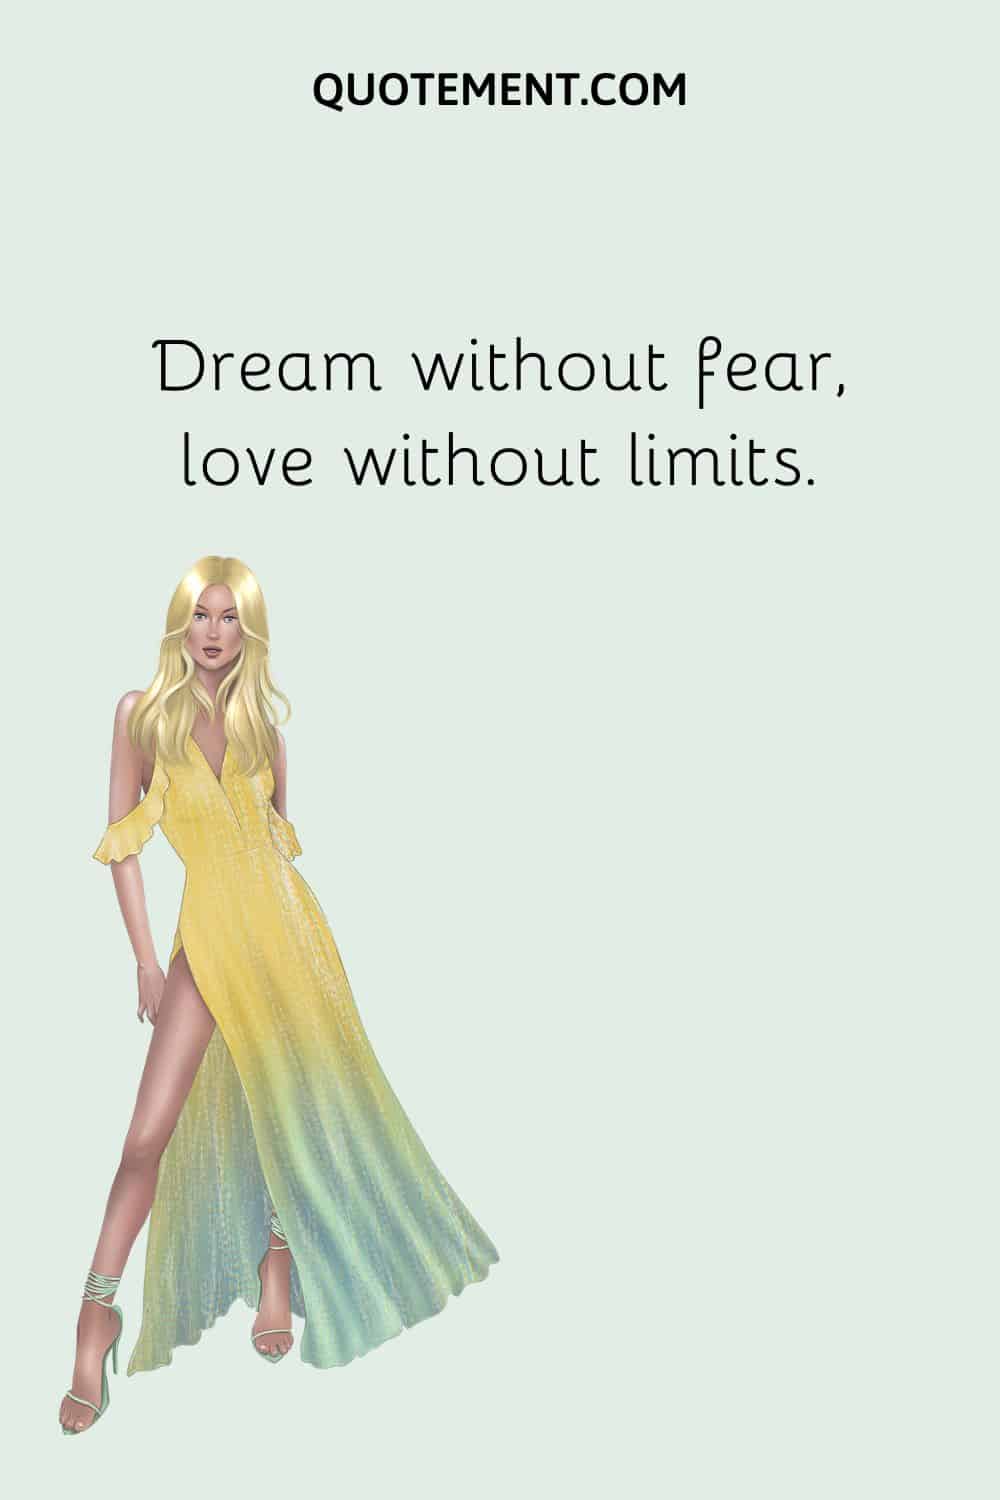 Dream without fear, love without limits